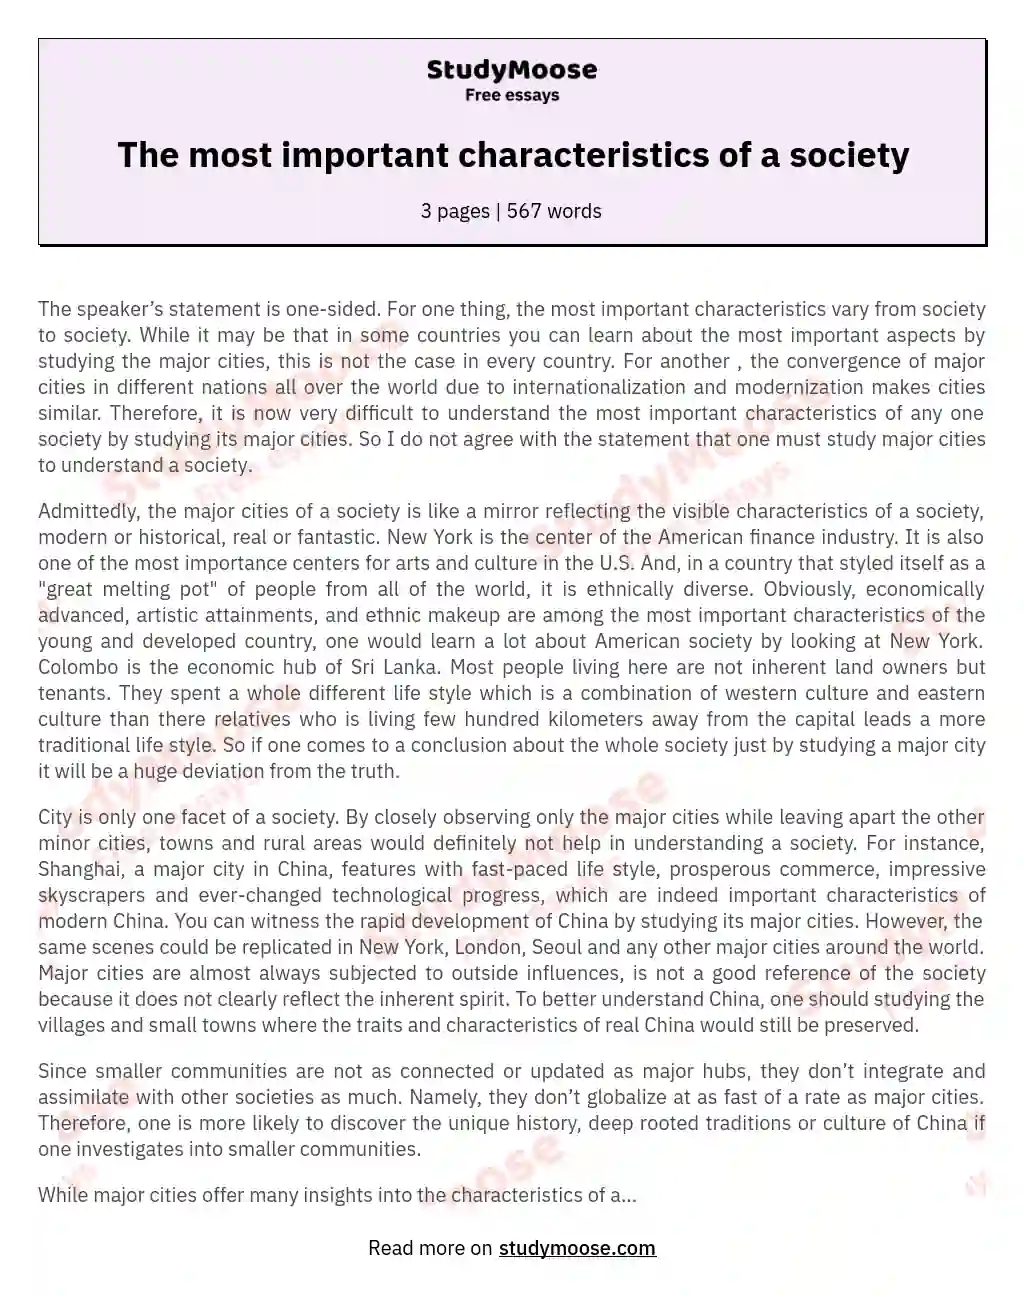 The most important characteristics of a society essay